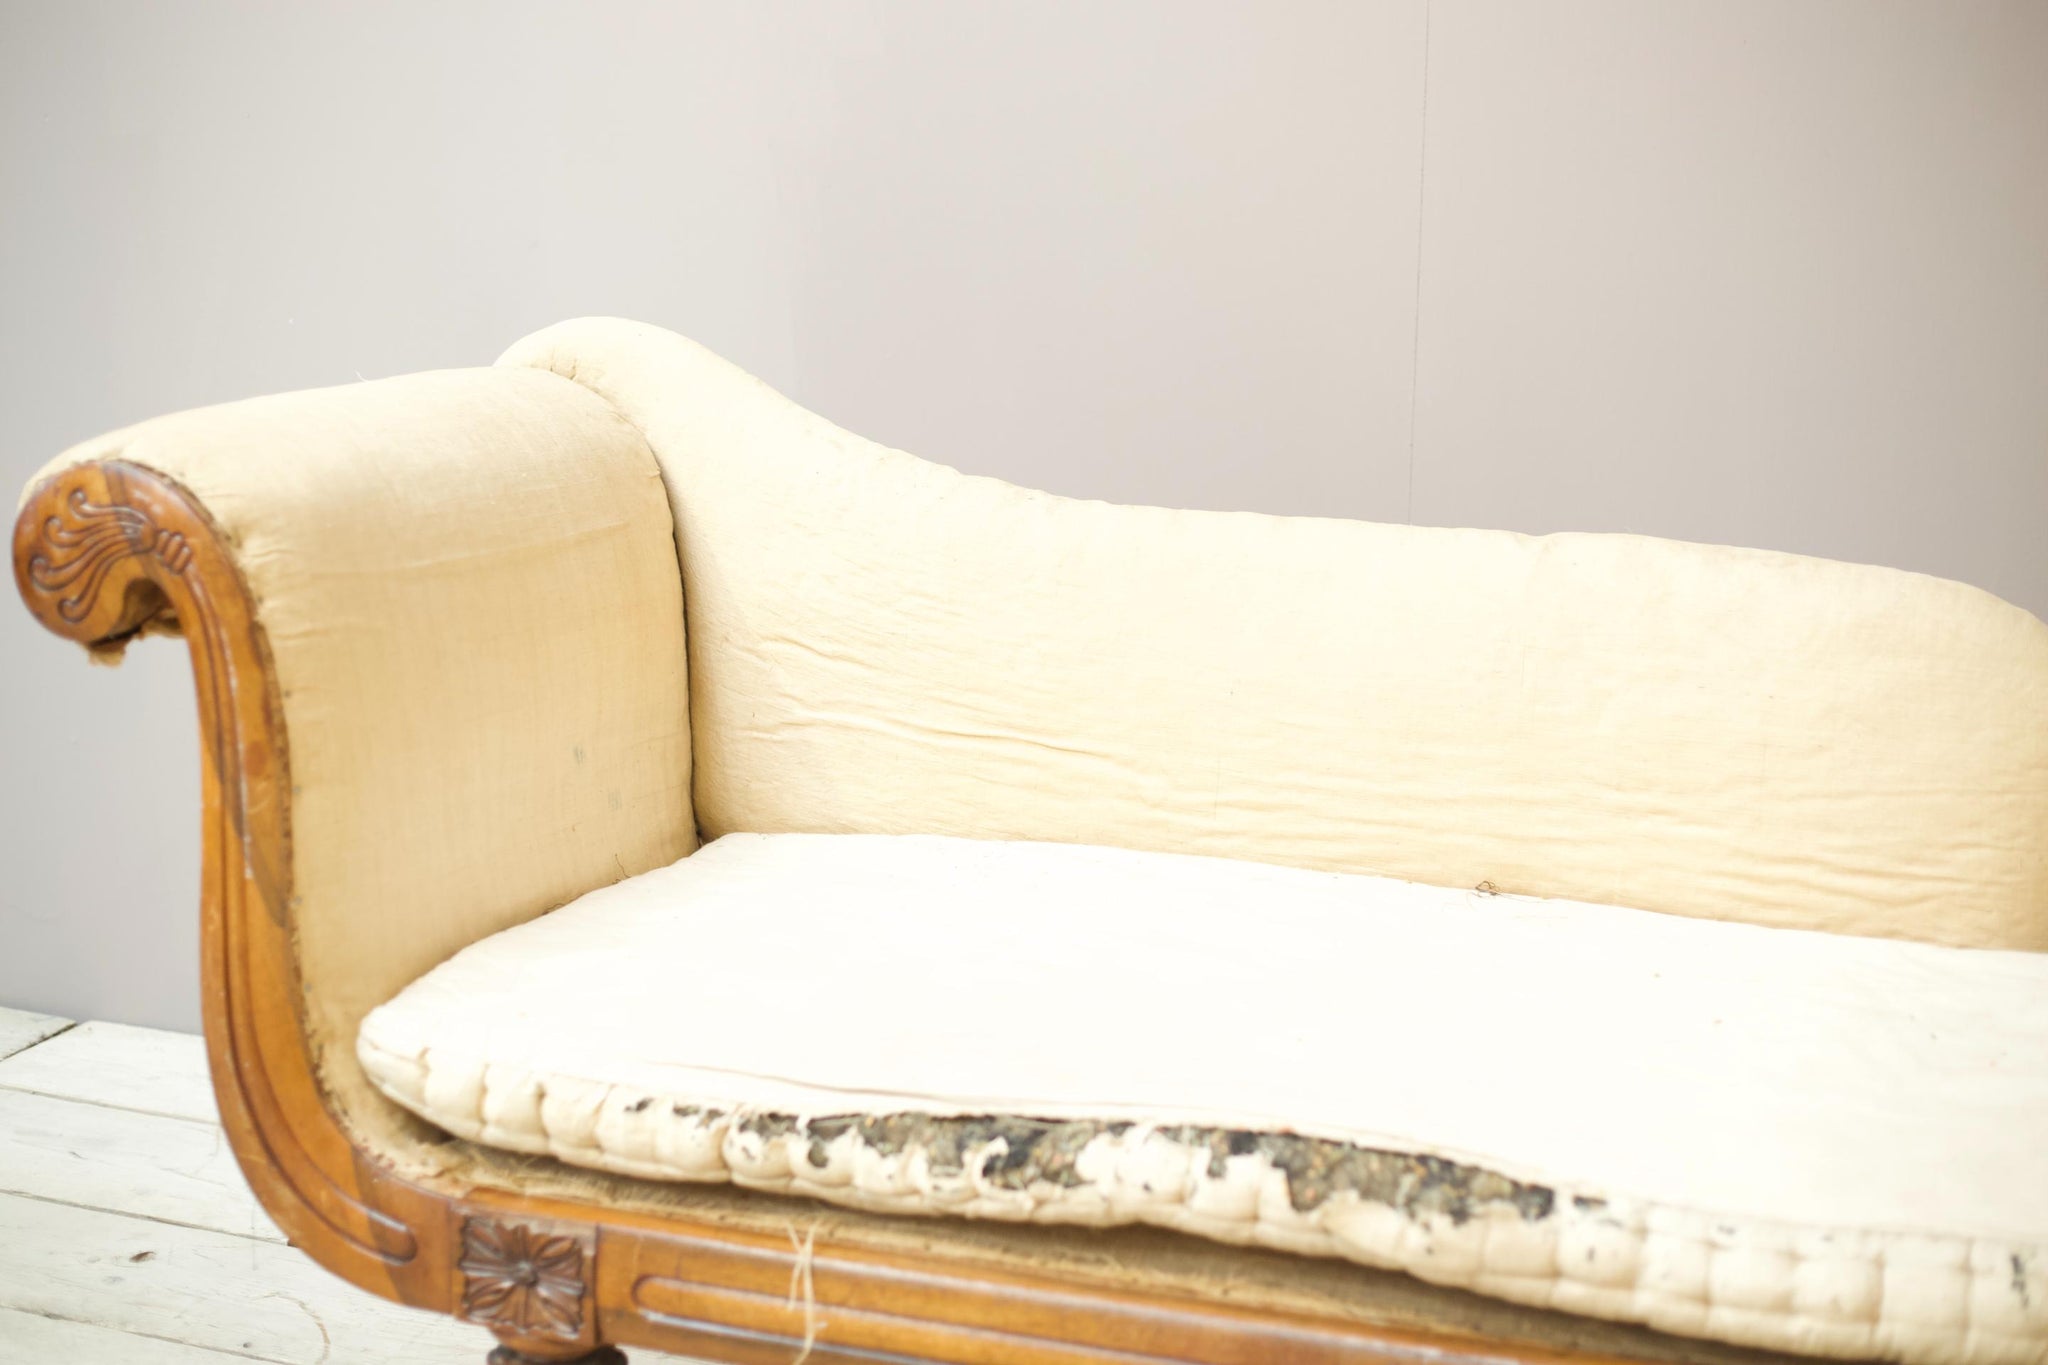 Regency period rosewood Chaise longue